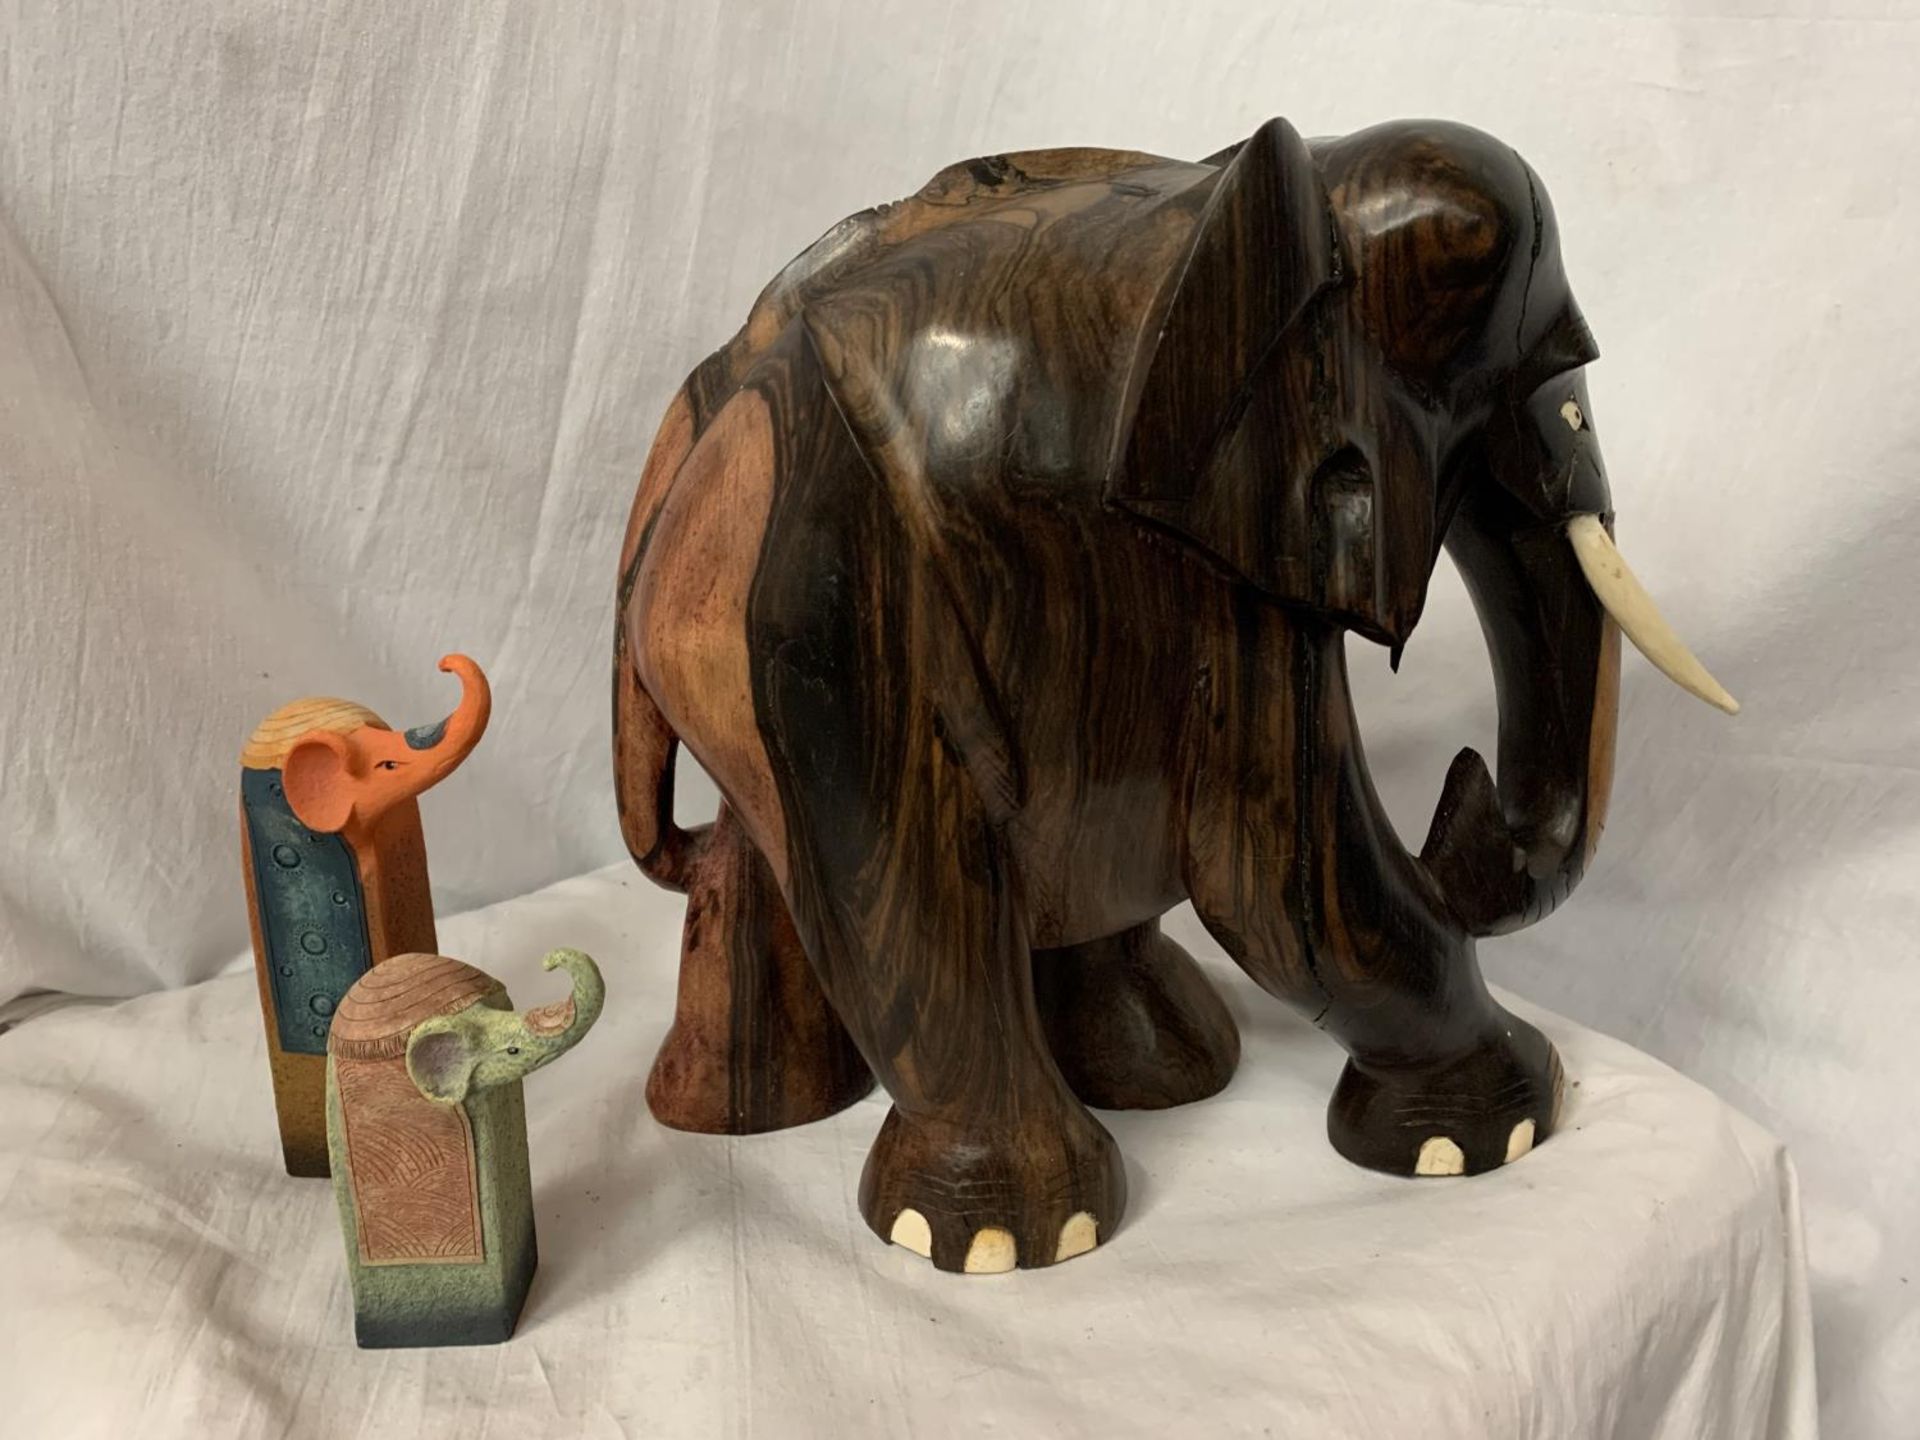 A LARGE CARVED HEAVY HARD WOOD ELEPHANT (H: APPROX. 30CM) AND TWO CERAMIC ELEPHANT ITEMS - Image 4 of 4